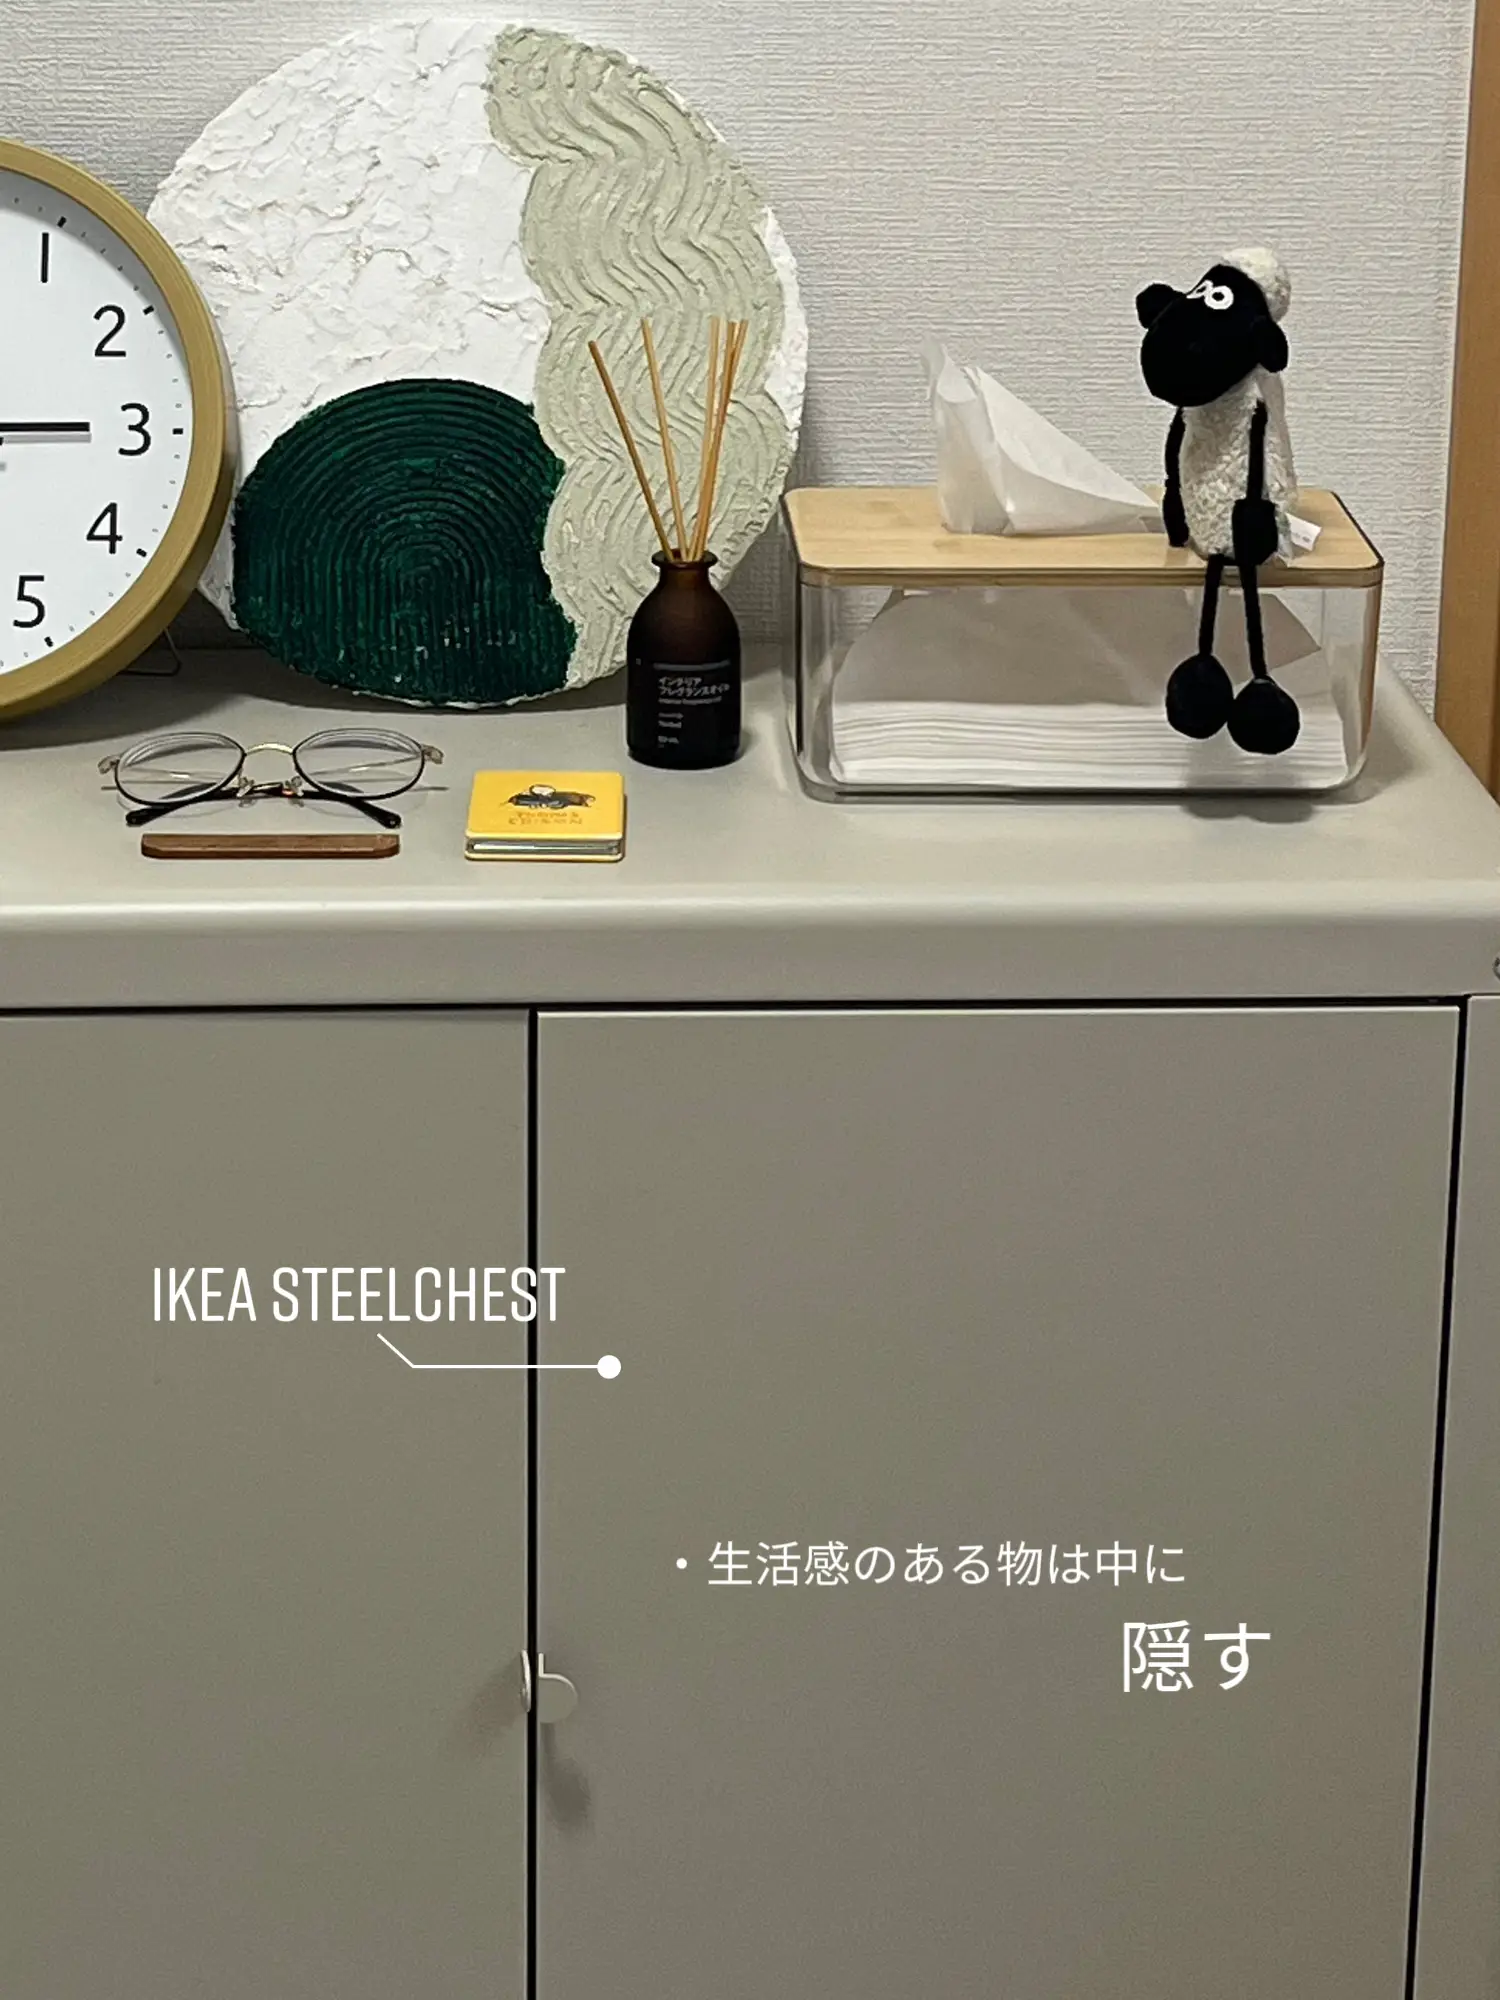 IKEA 】 Steel chest is cute   | Gallery posted by もてぃ | Lemon8